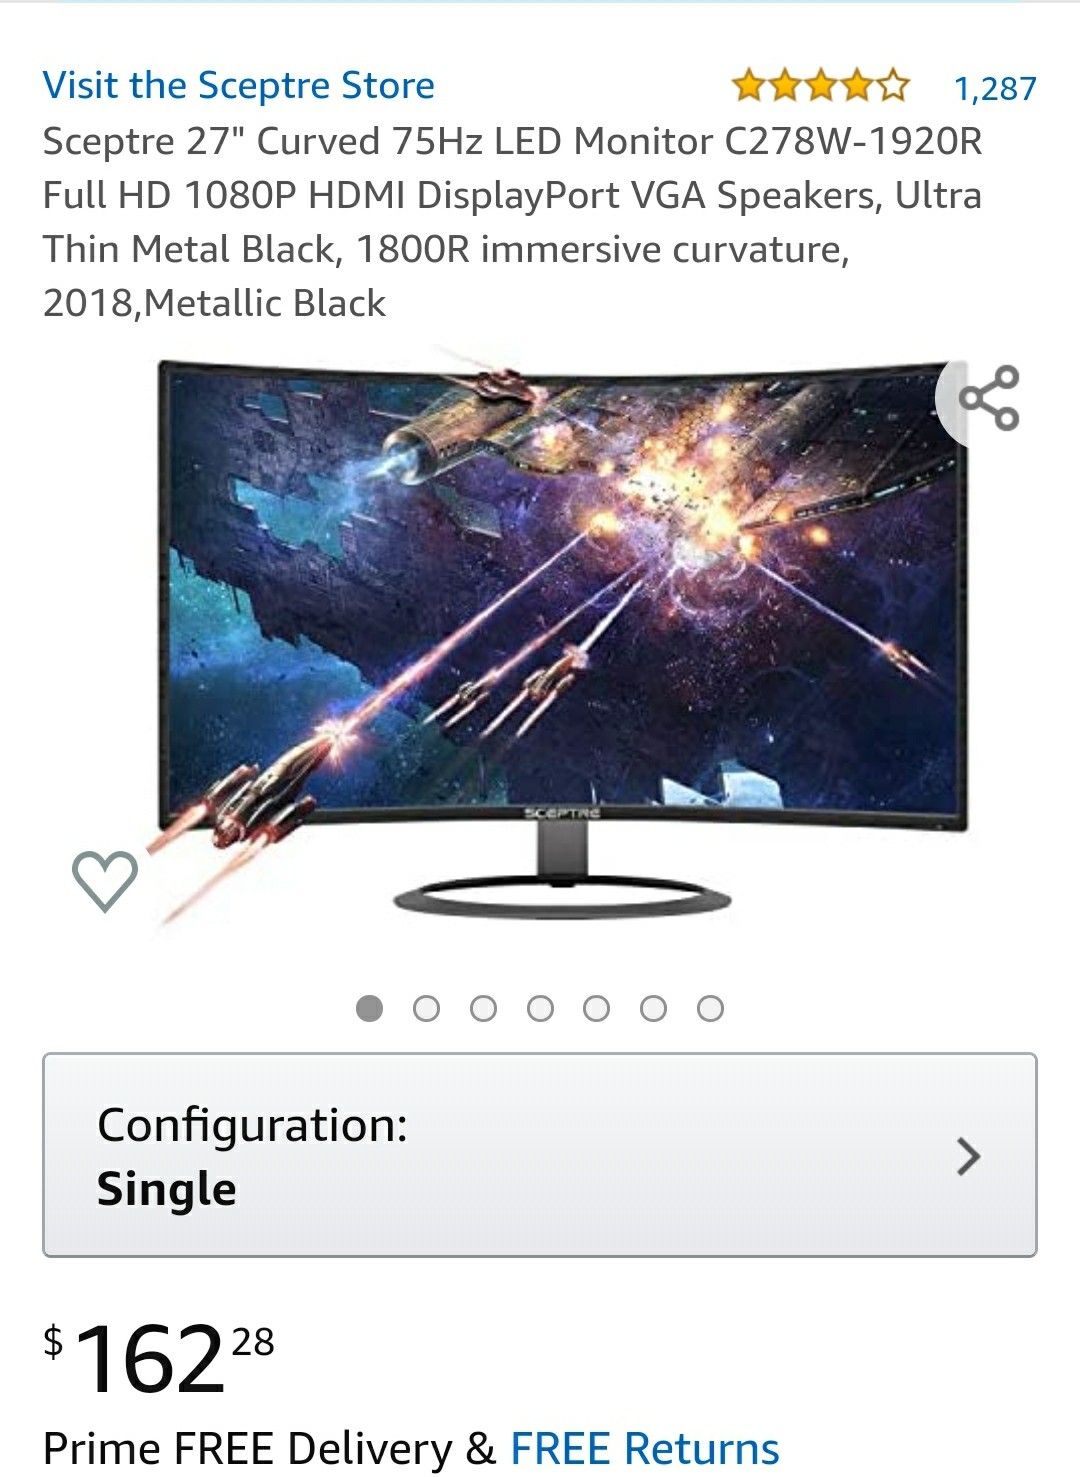 27" Sceptre curved monitor - LED 1080p/75Hz